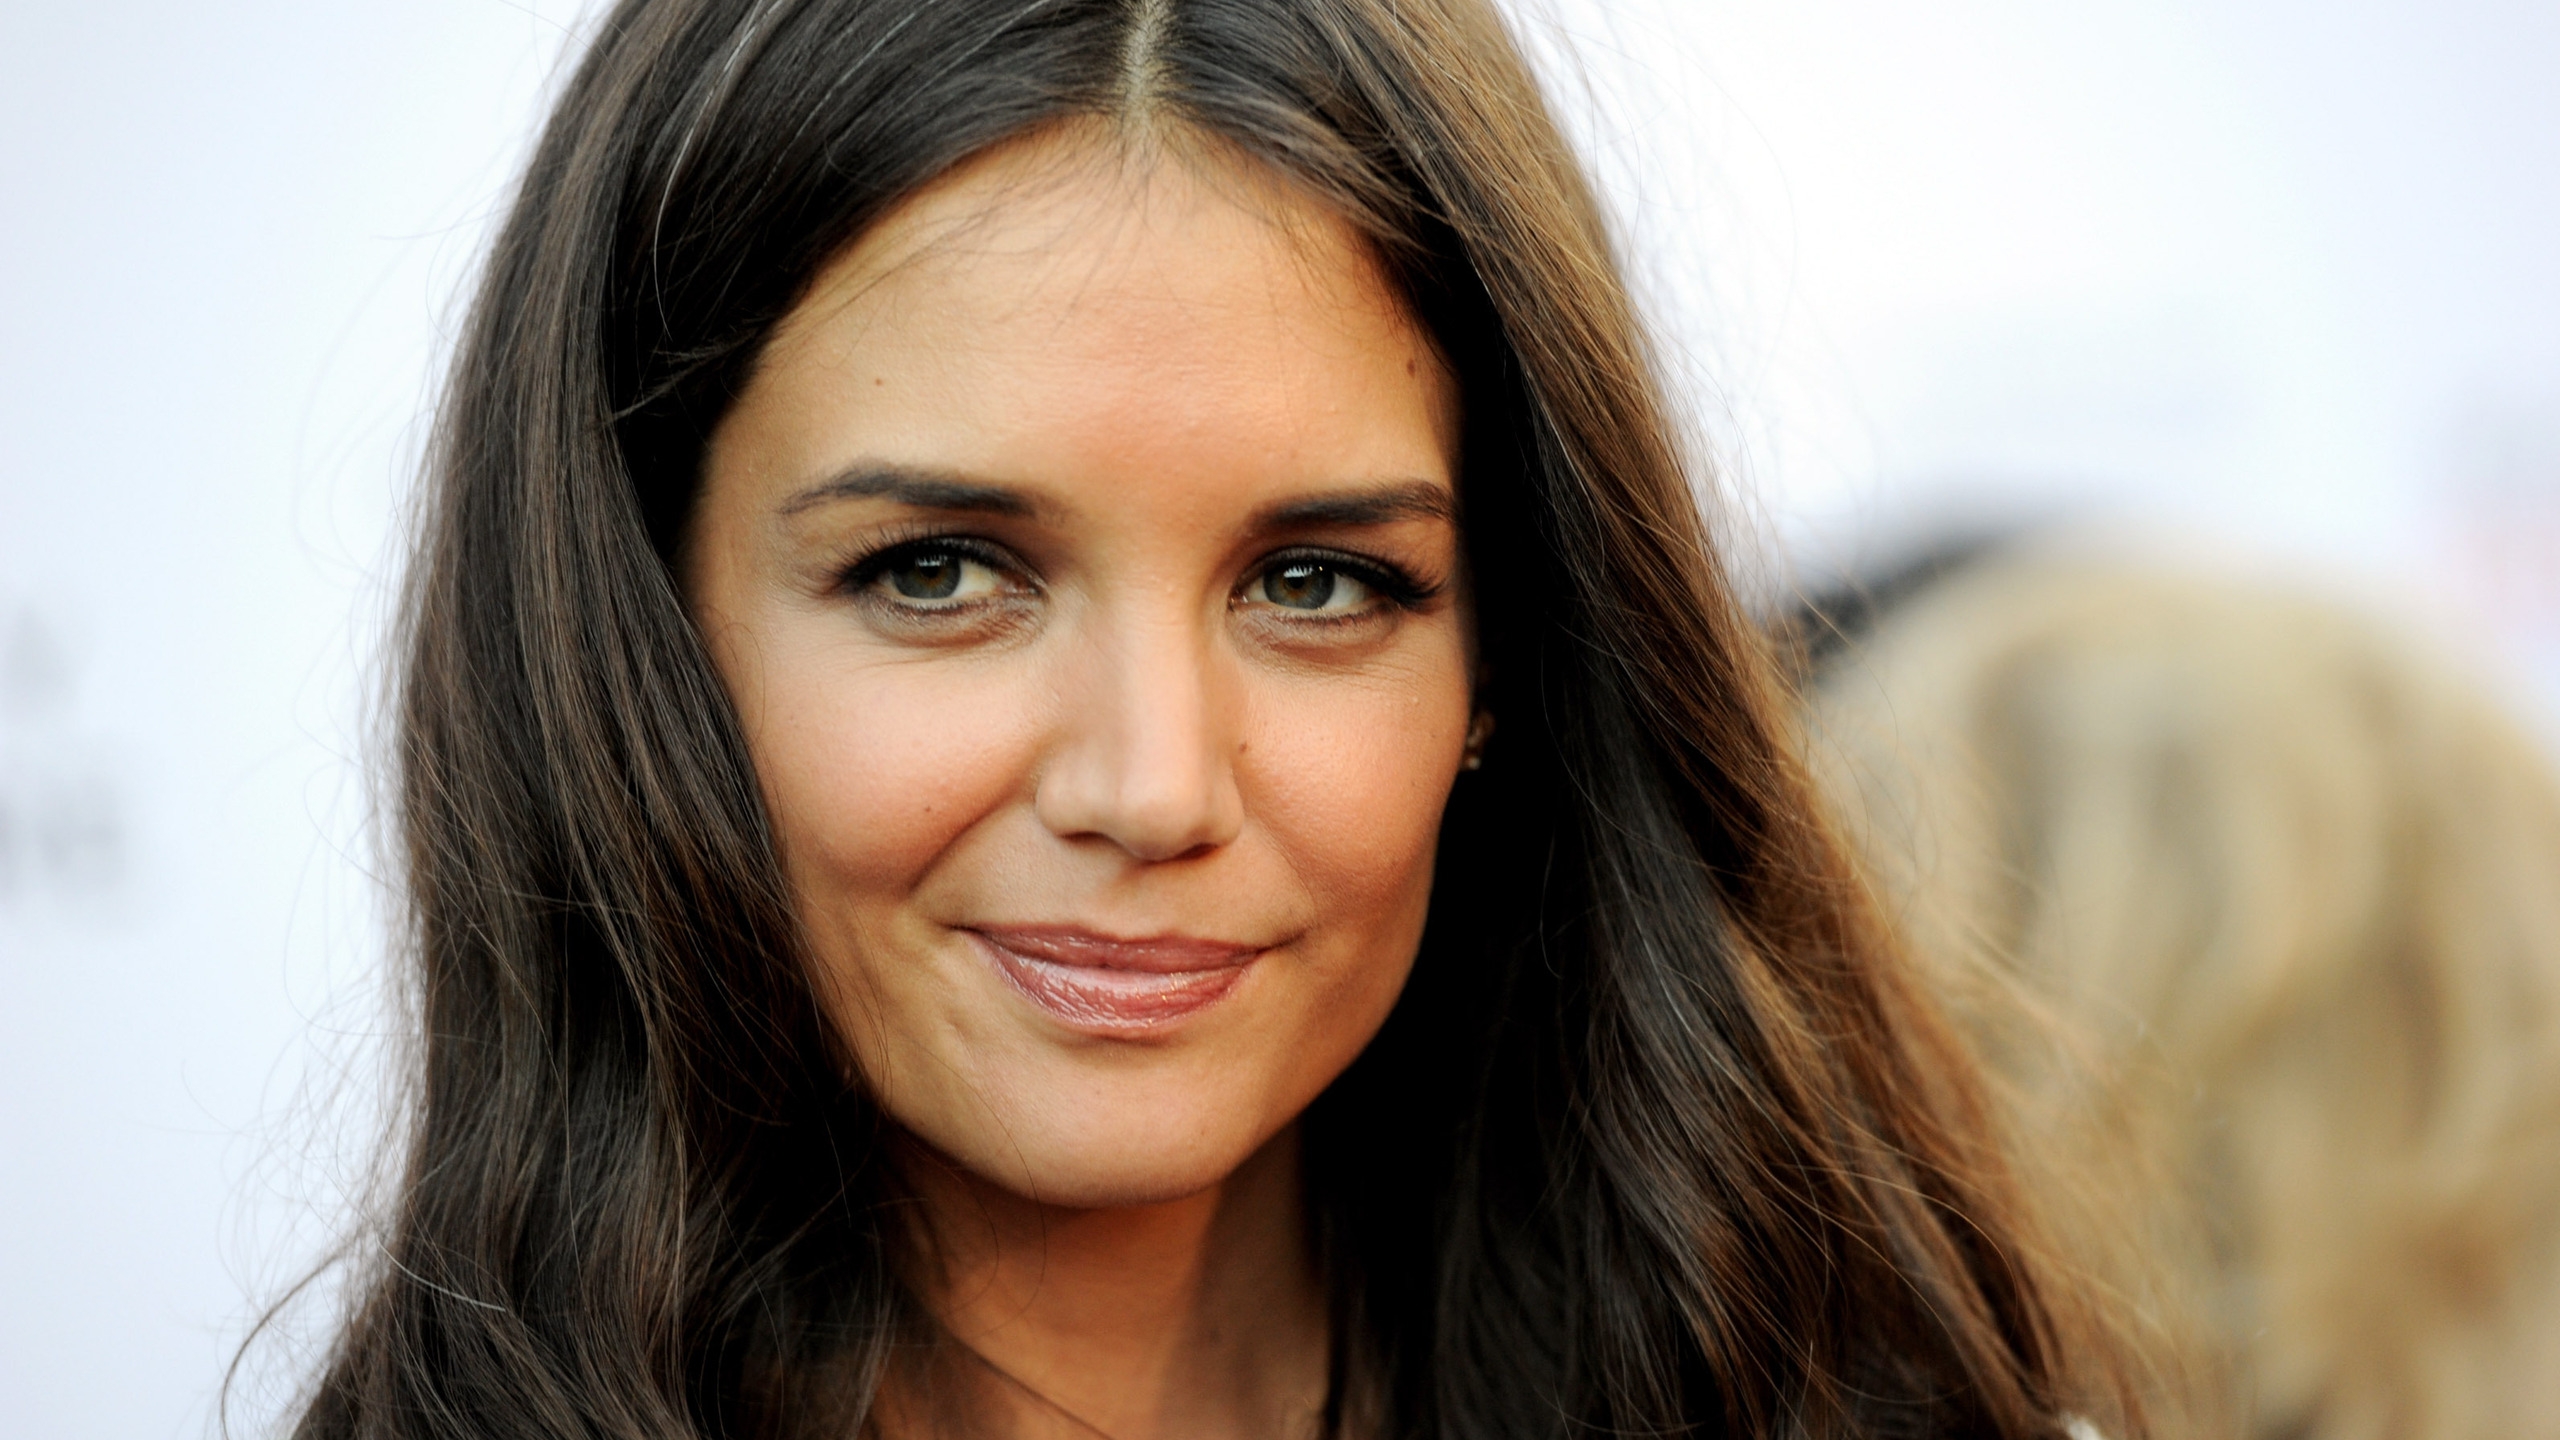 Katie Holmes Hair for 2560x1440 HDTV resolution